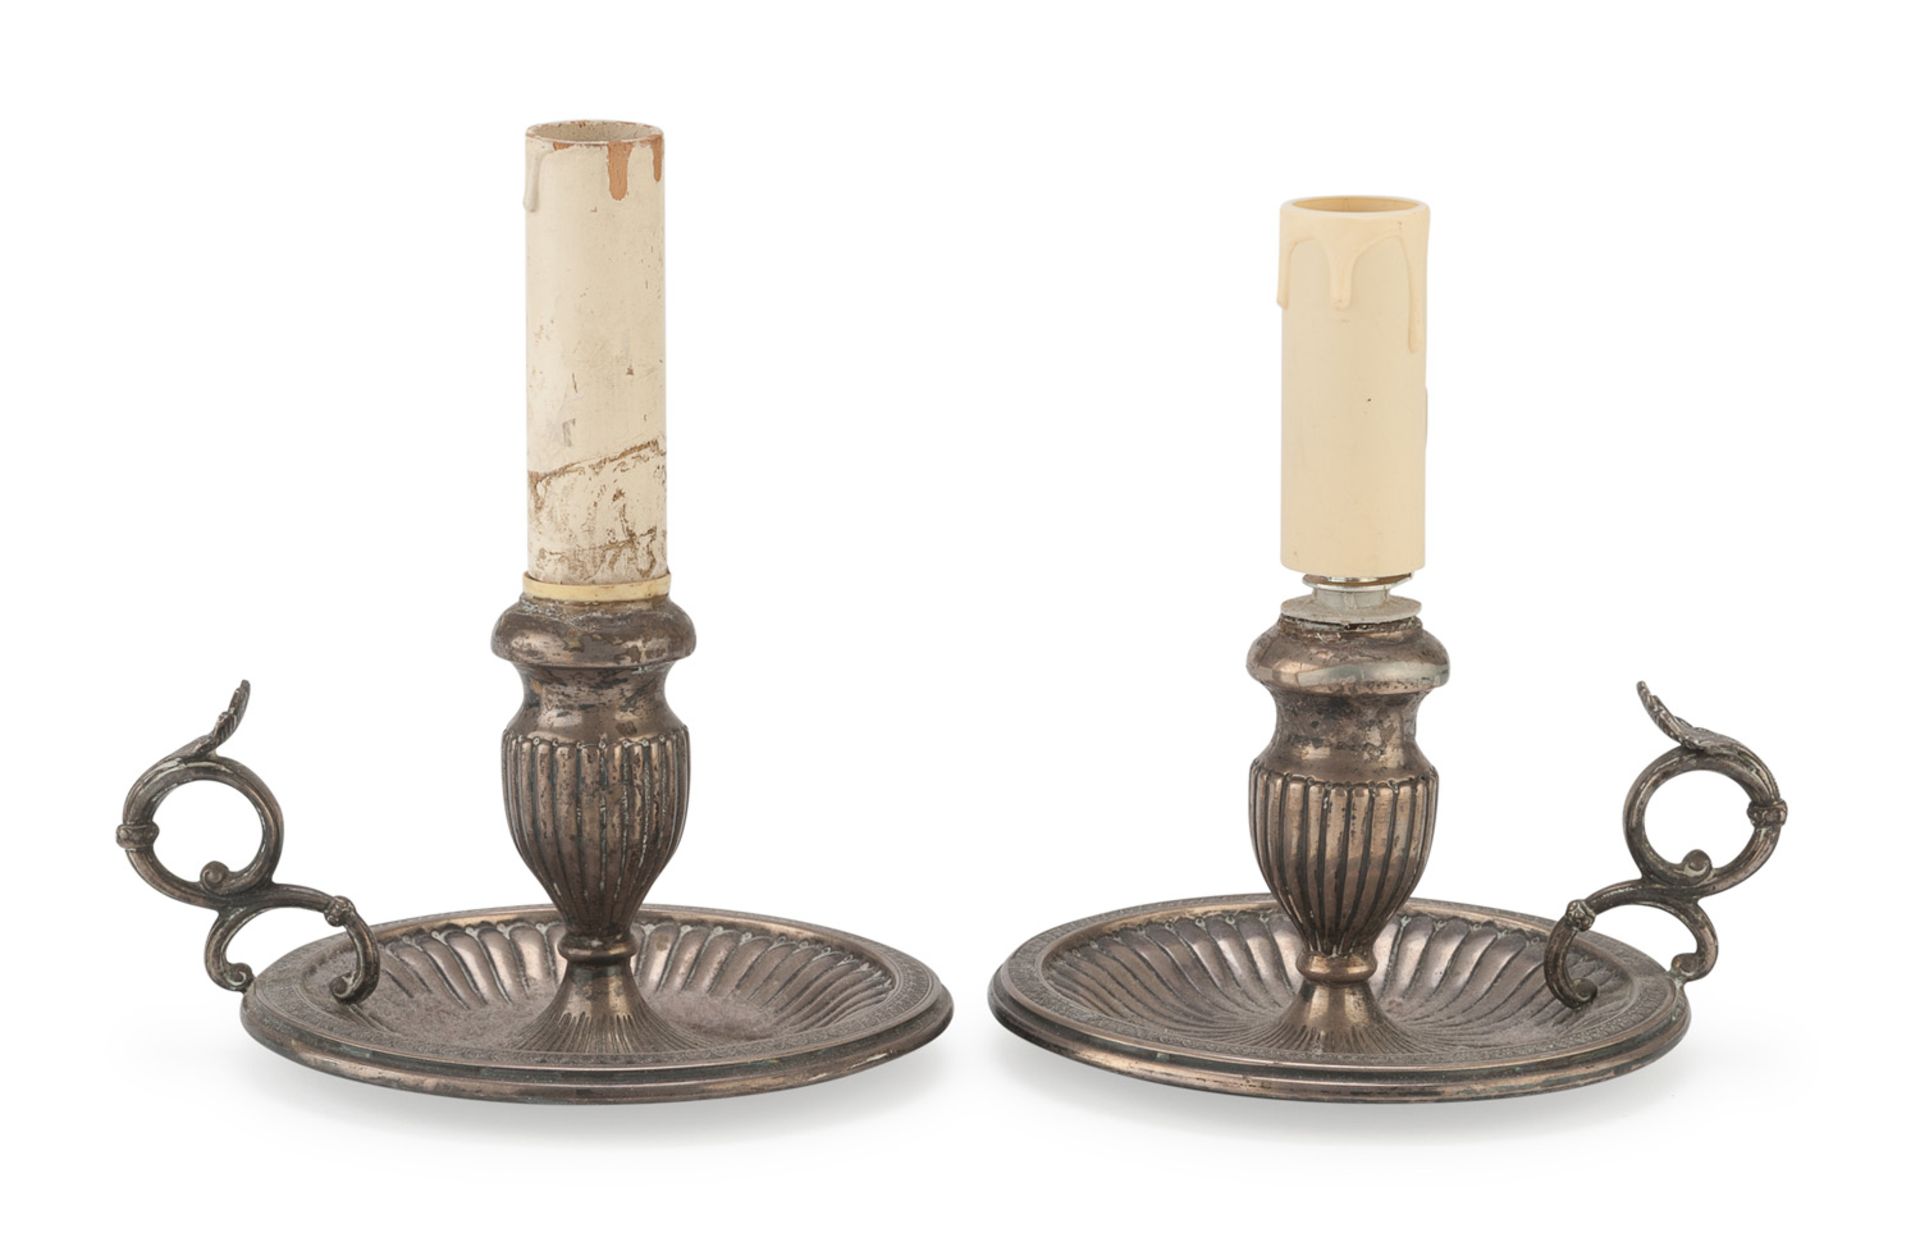 PAIR OF SILVER CANDLESTICKS KINGDOM OF ITALY EARLY 20TH CENTURY